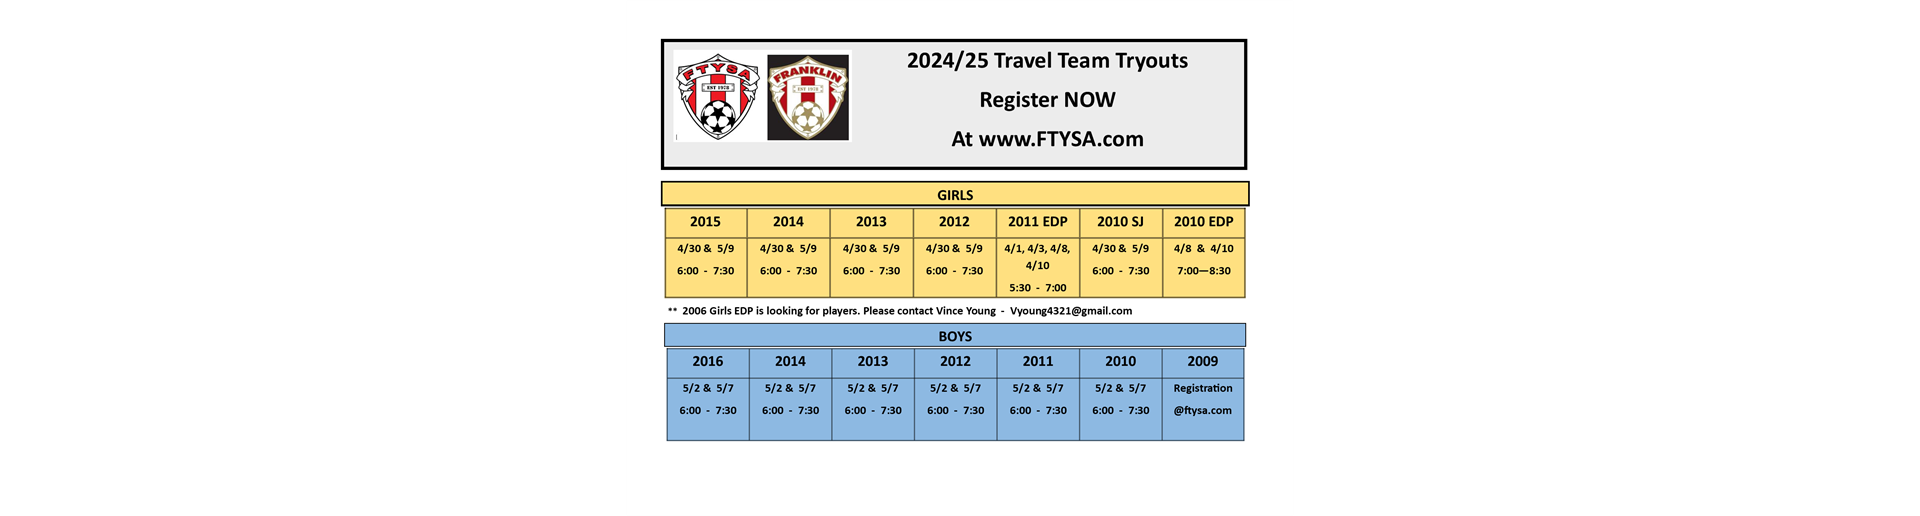 TEAM TRYOUT DATES